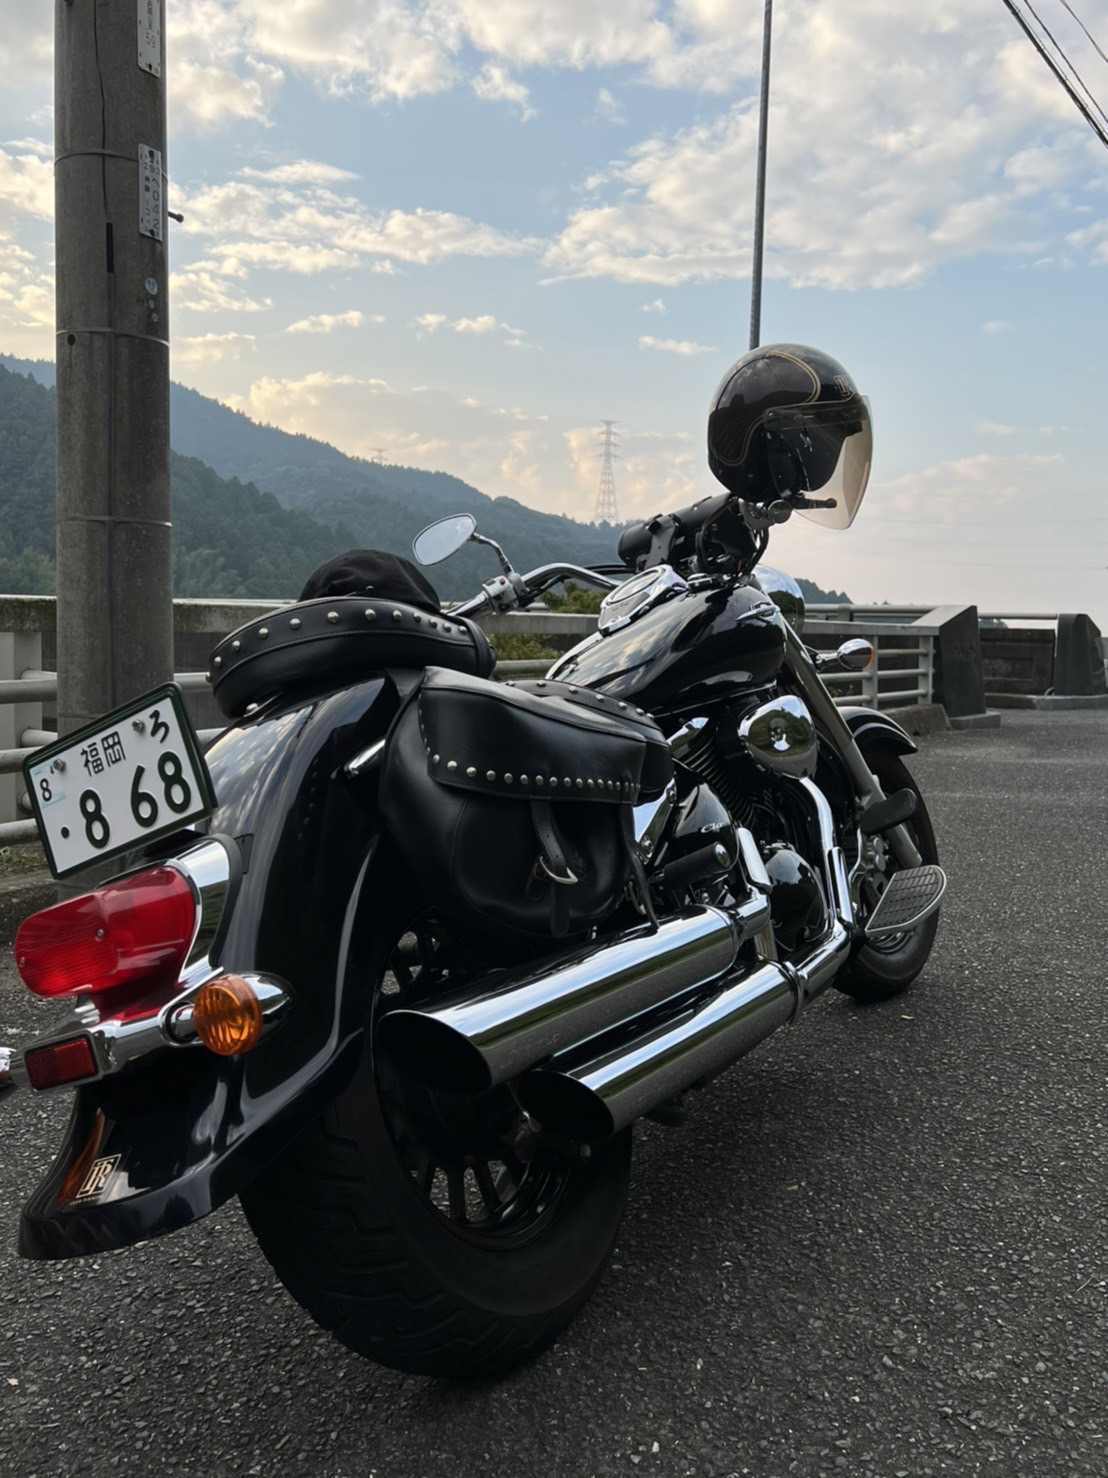 You are currently viewing ☆イントルーダ―４００SUZUKI クラシック☆